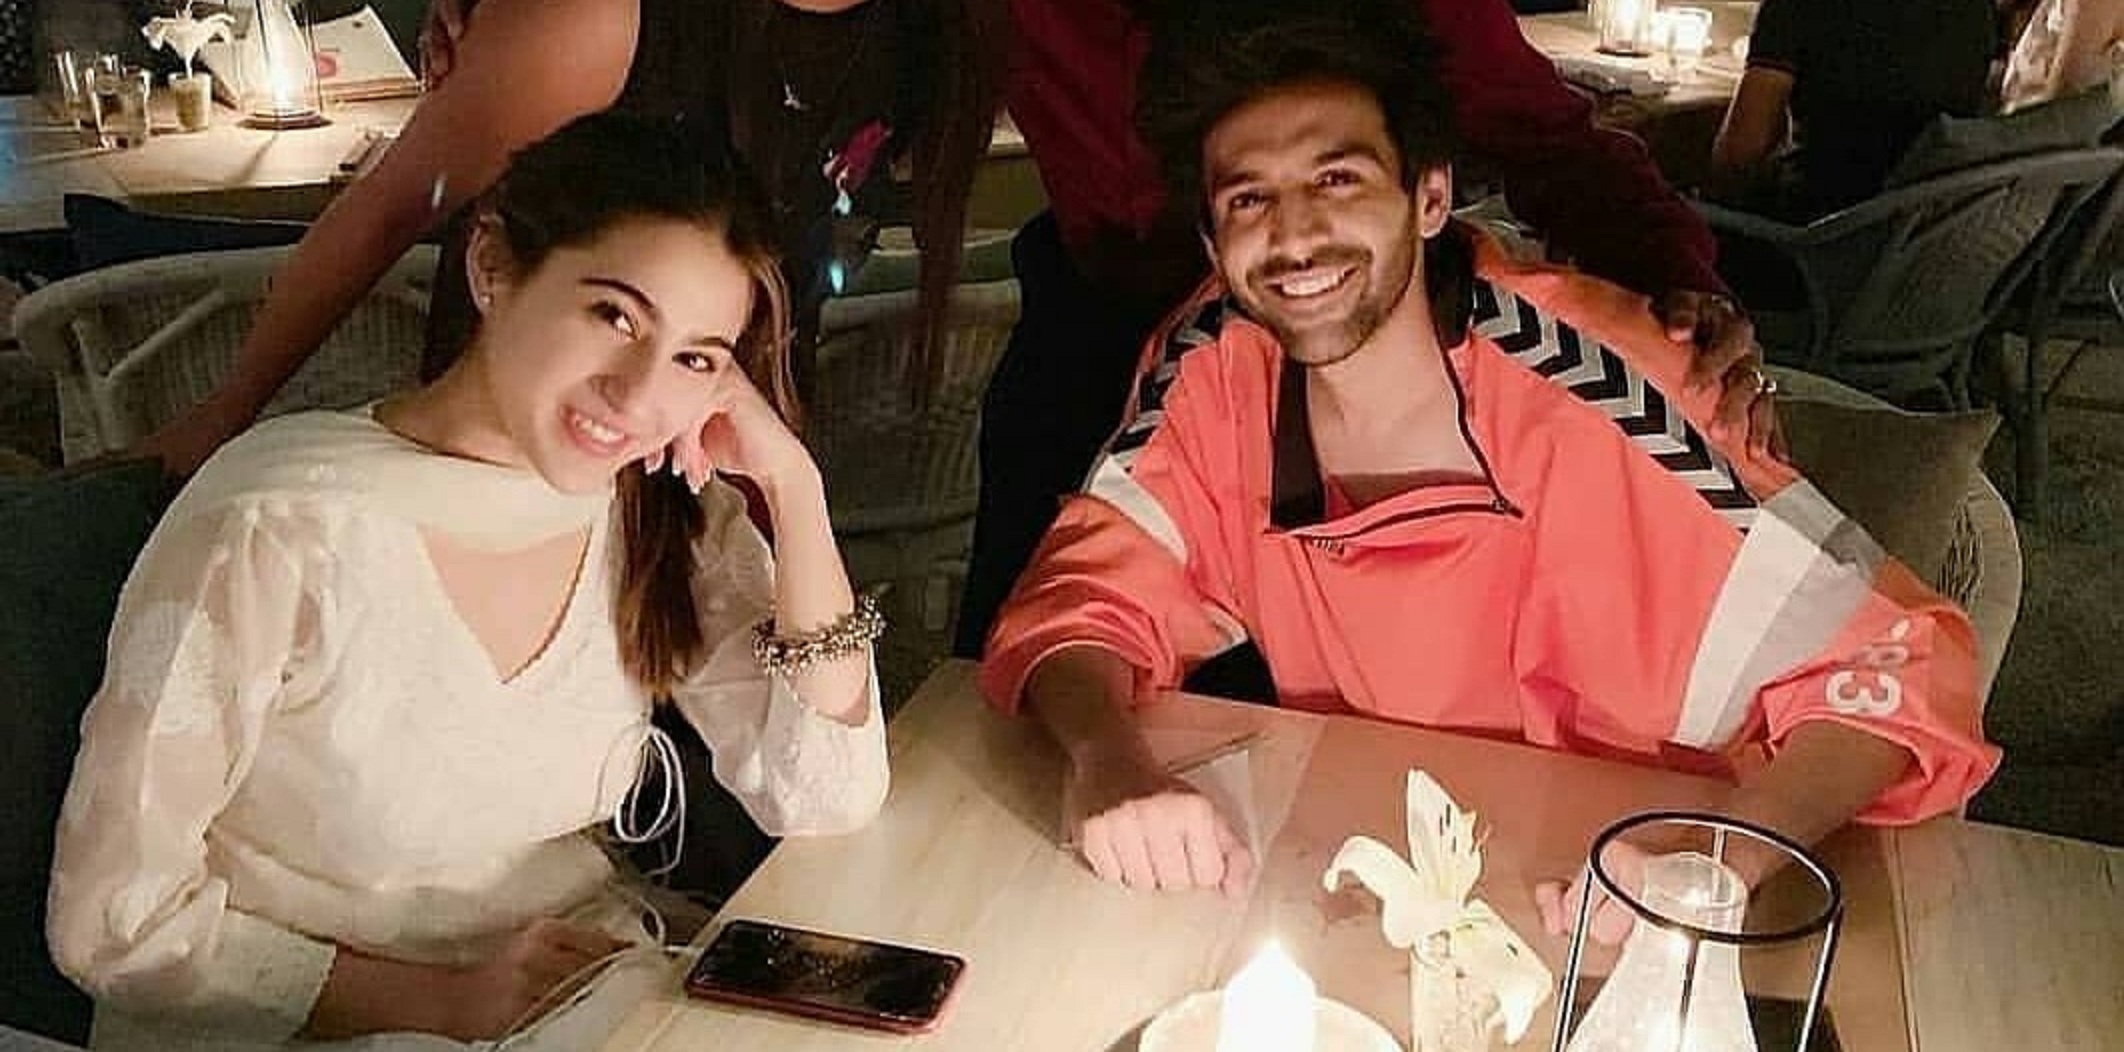 Kartik Aaryan Takes Sara Ali Khan Out On a Candle-Light Dinner Date. See Pics!